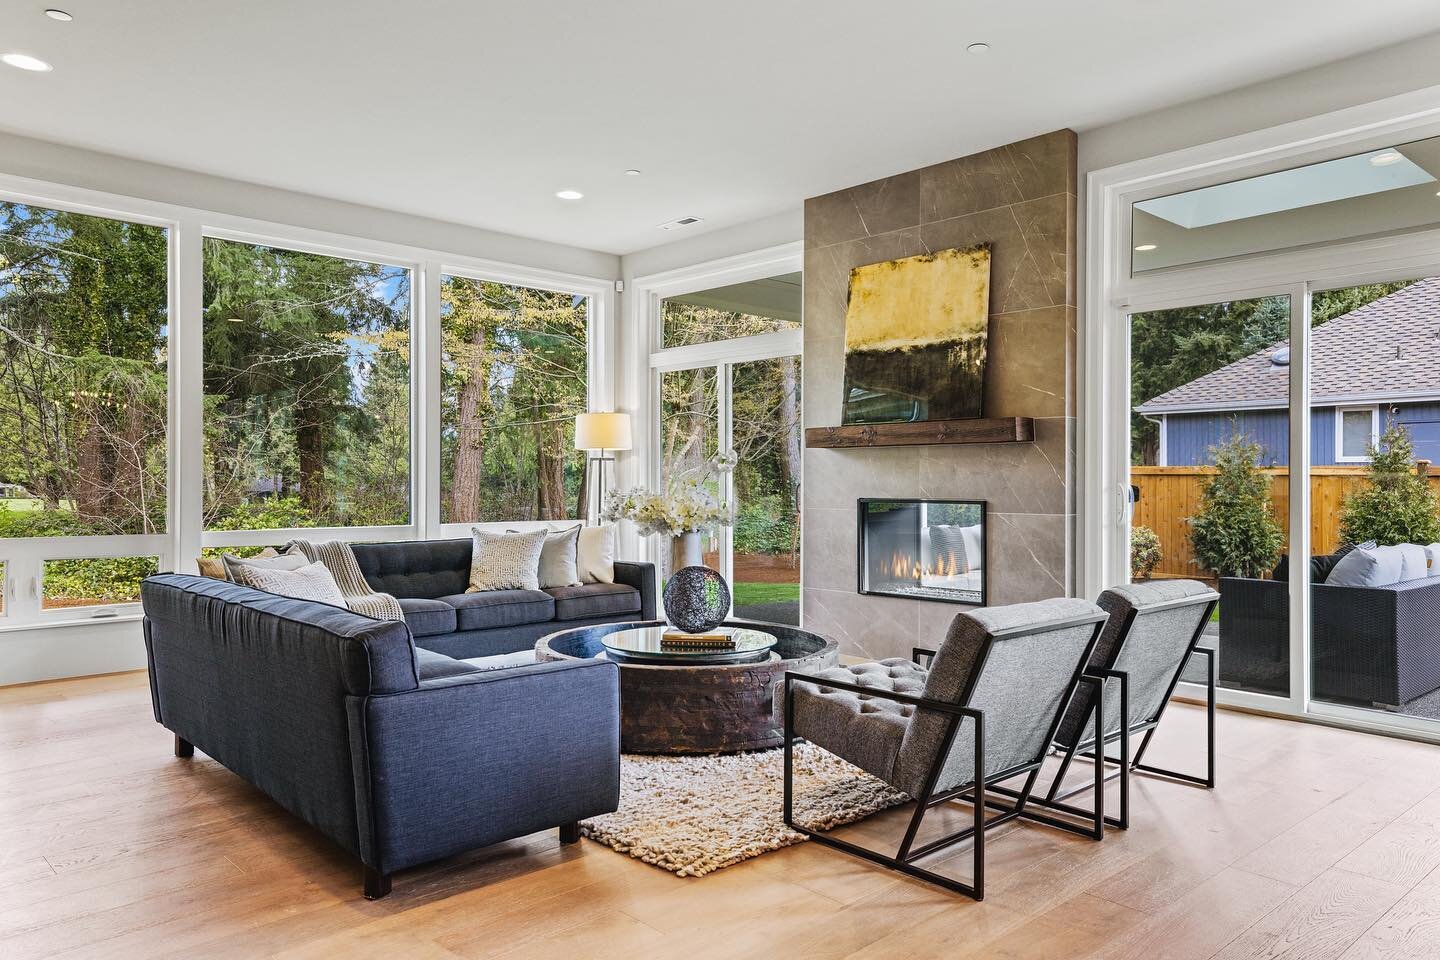 Come see this gorgeous new construction listing on the 5th S Fairway of the historic Sahalee Gold Course. The popular Murray Franklyn Keegan, &quot;Signature&quot; plan features 5 bedrooms and 4.5 baths. Soaring ceilings throughout with a main floor 